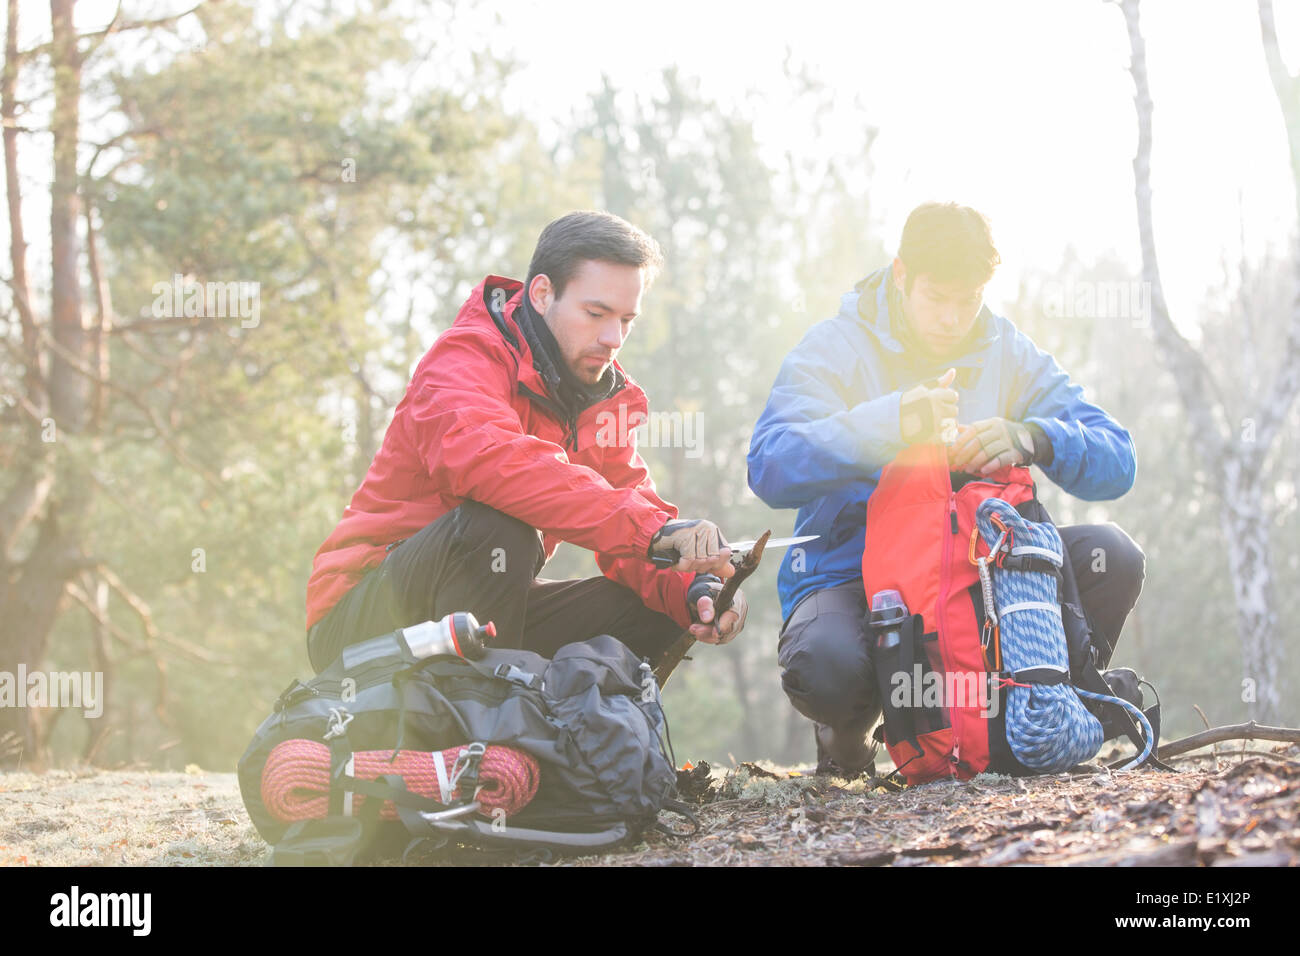 Male backpacker with friend whittling wood in forest Stock Photo